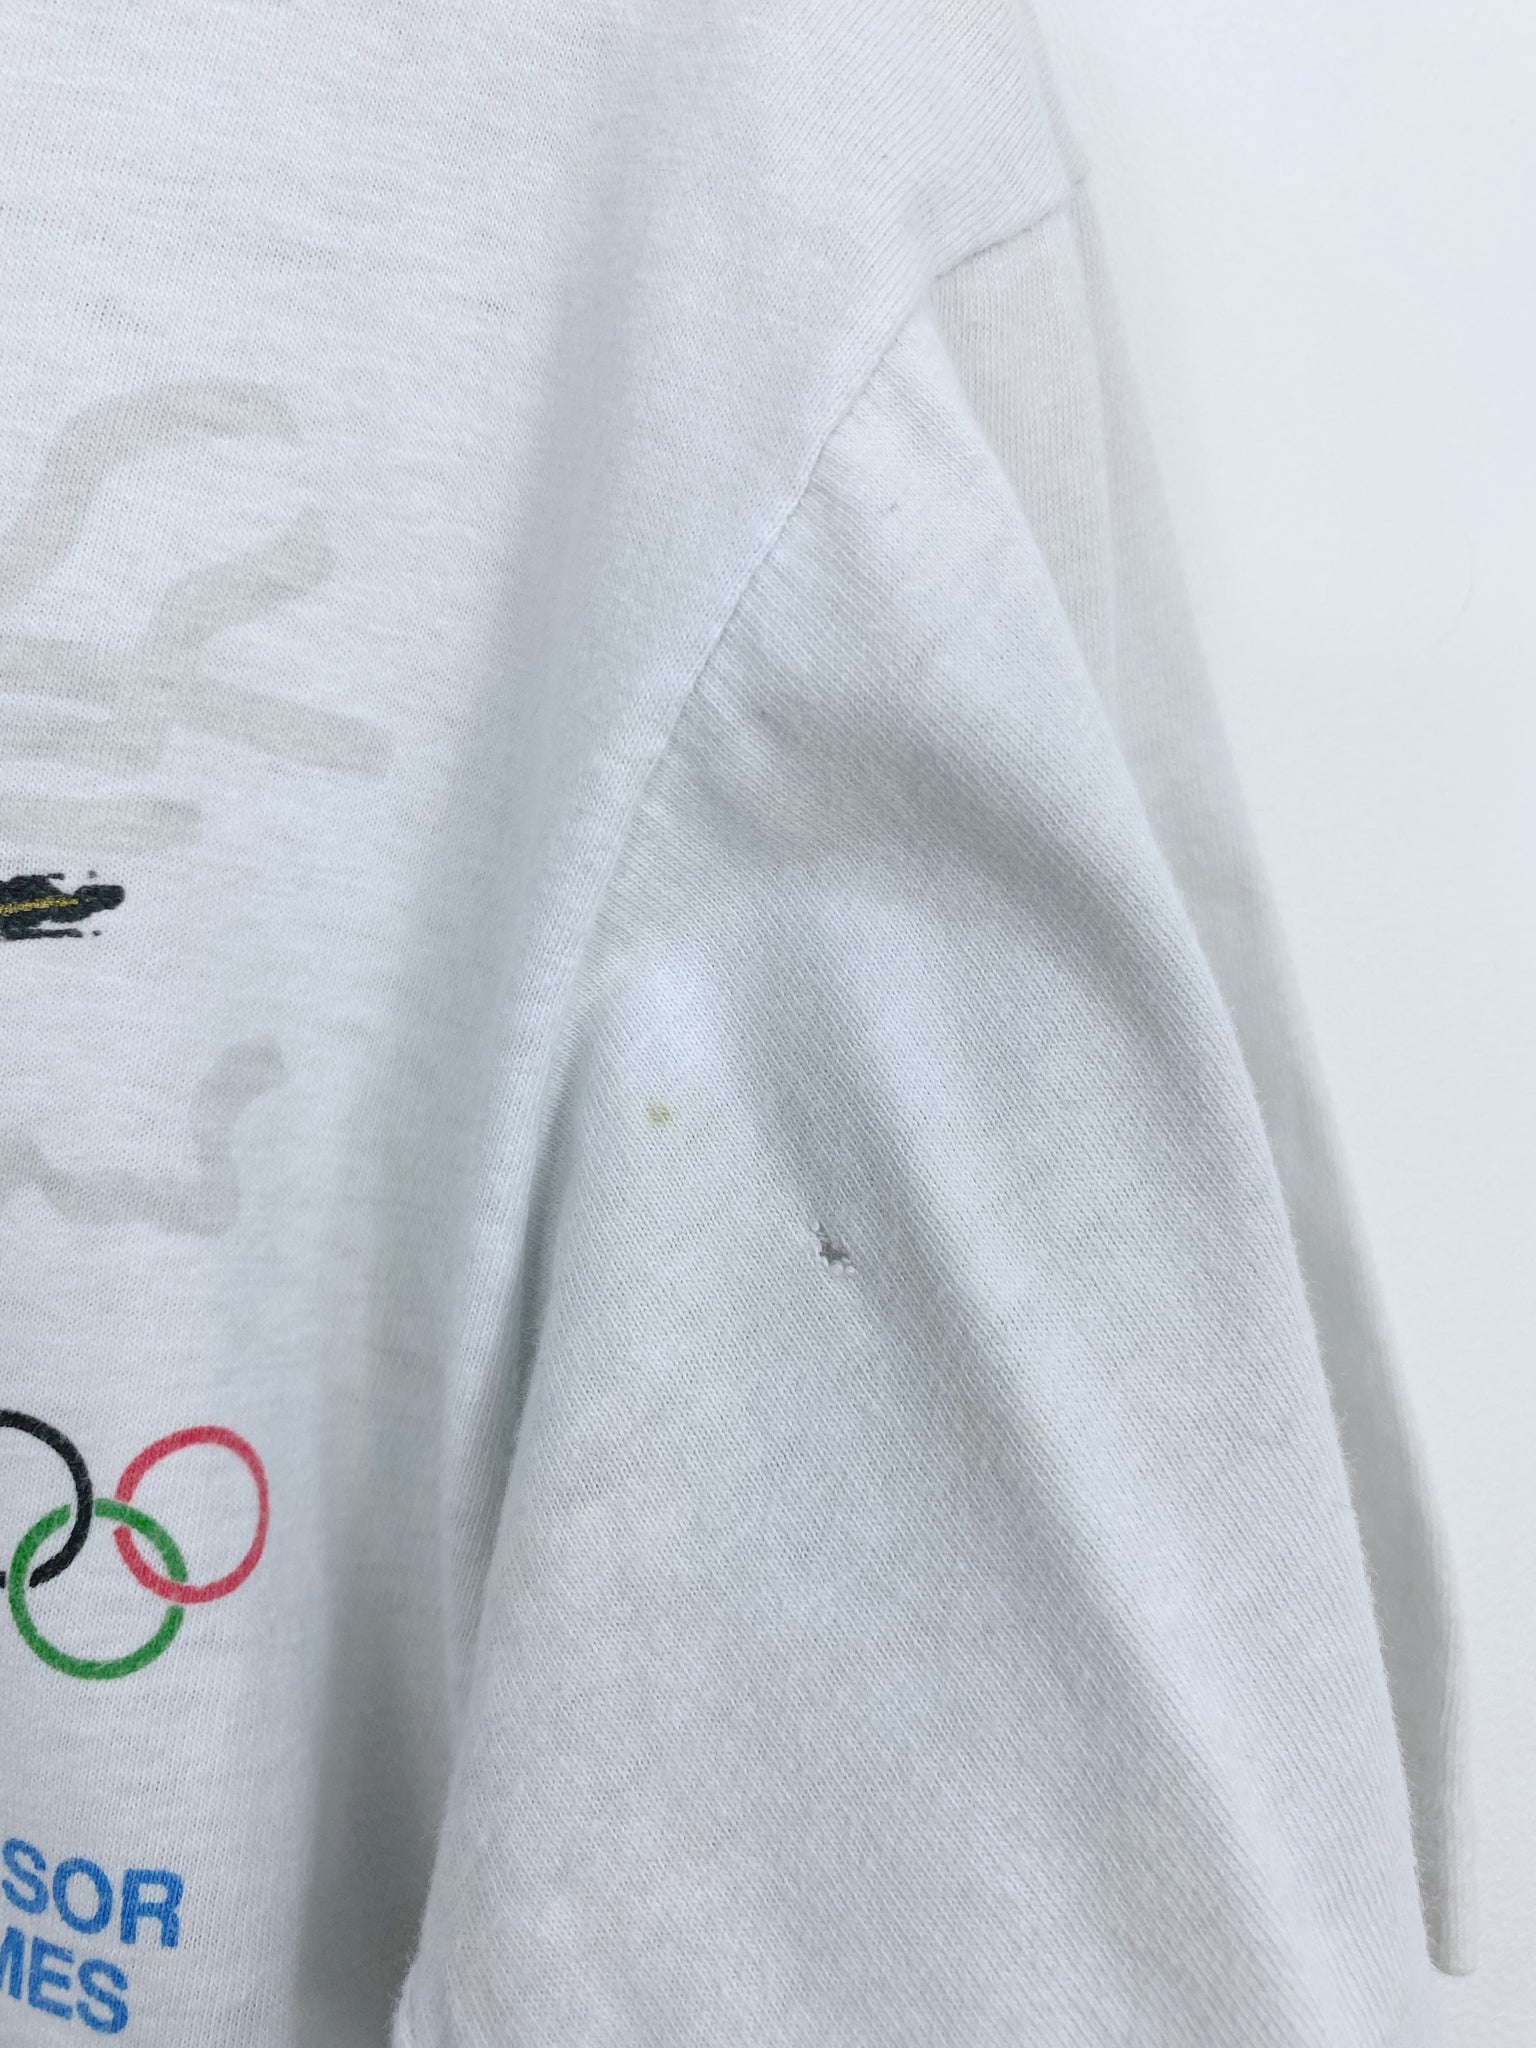 Vintage 1992 Olympic Games T-shirt M